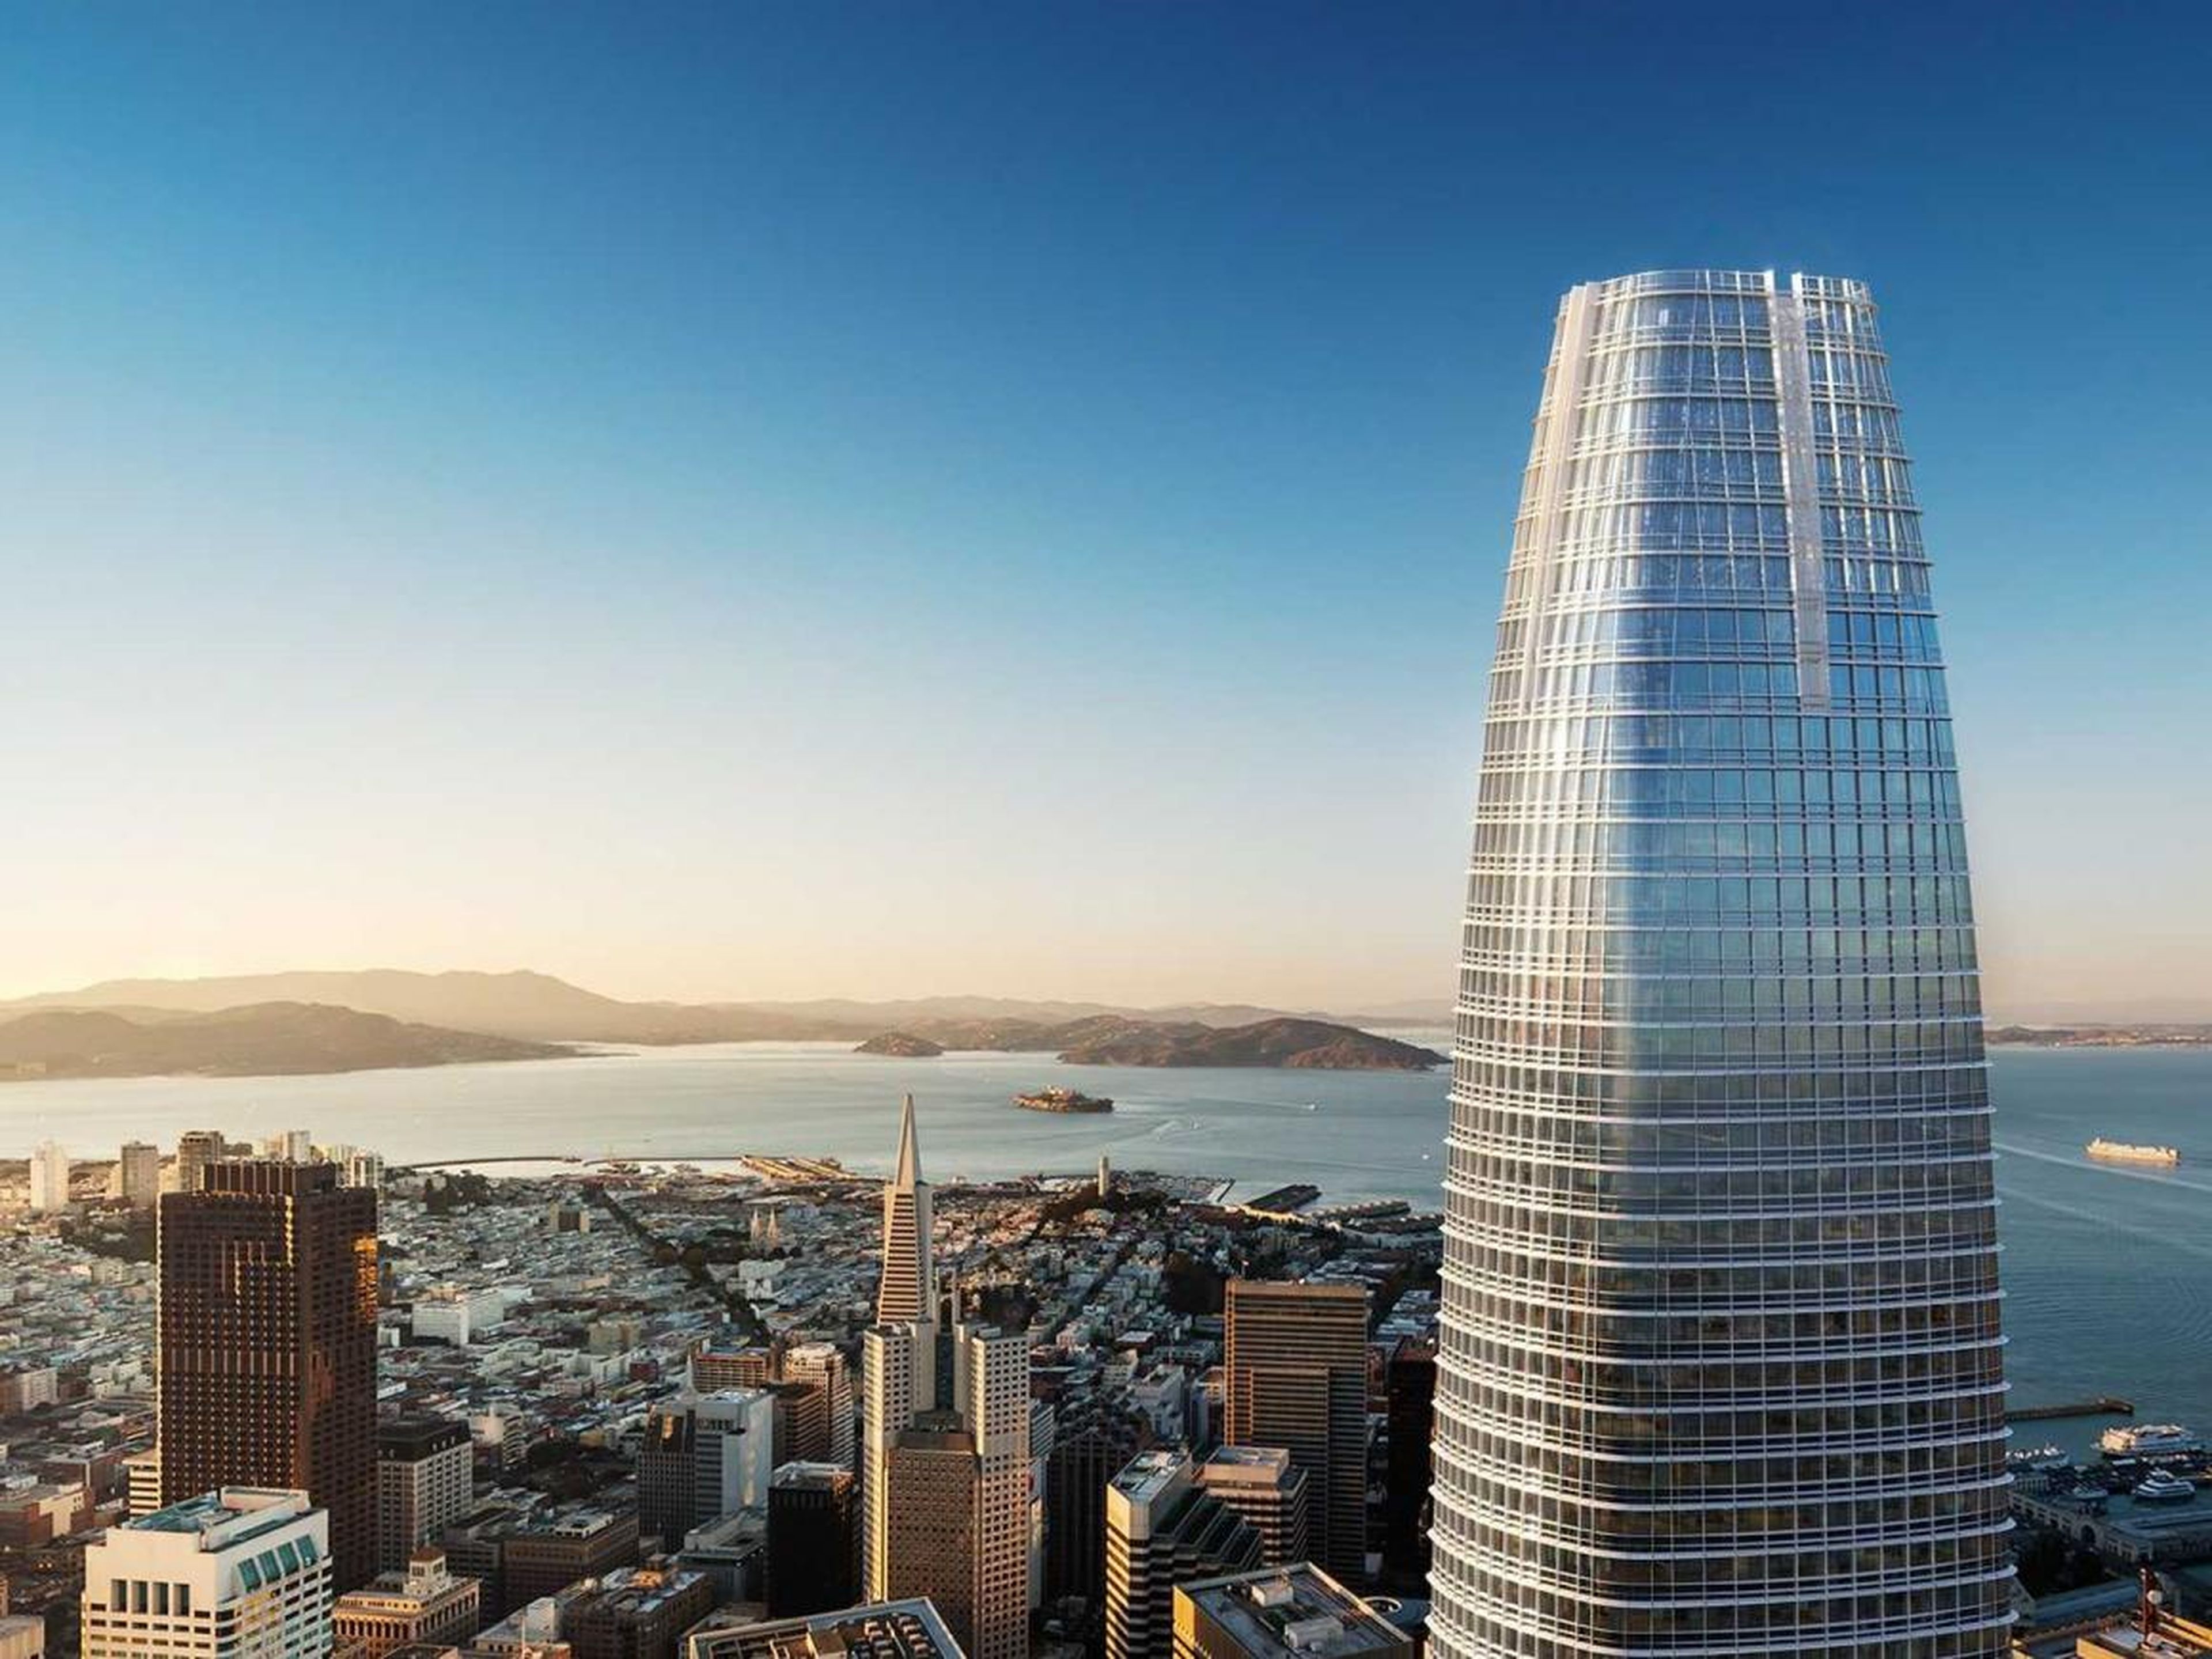 The 1,070-foot-high, $1.1 billion Salesforce Tower is the tallest and most expensive skyscraper in San Francisco. It opened in May 2018.